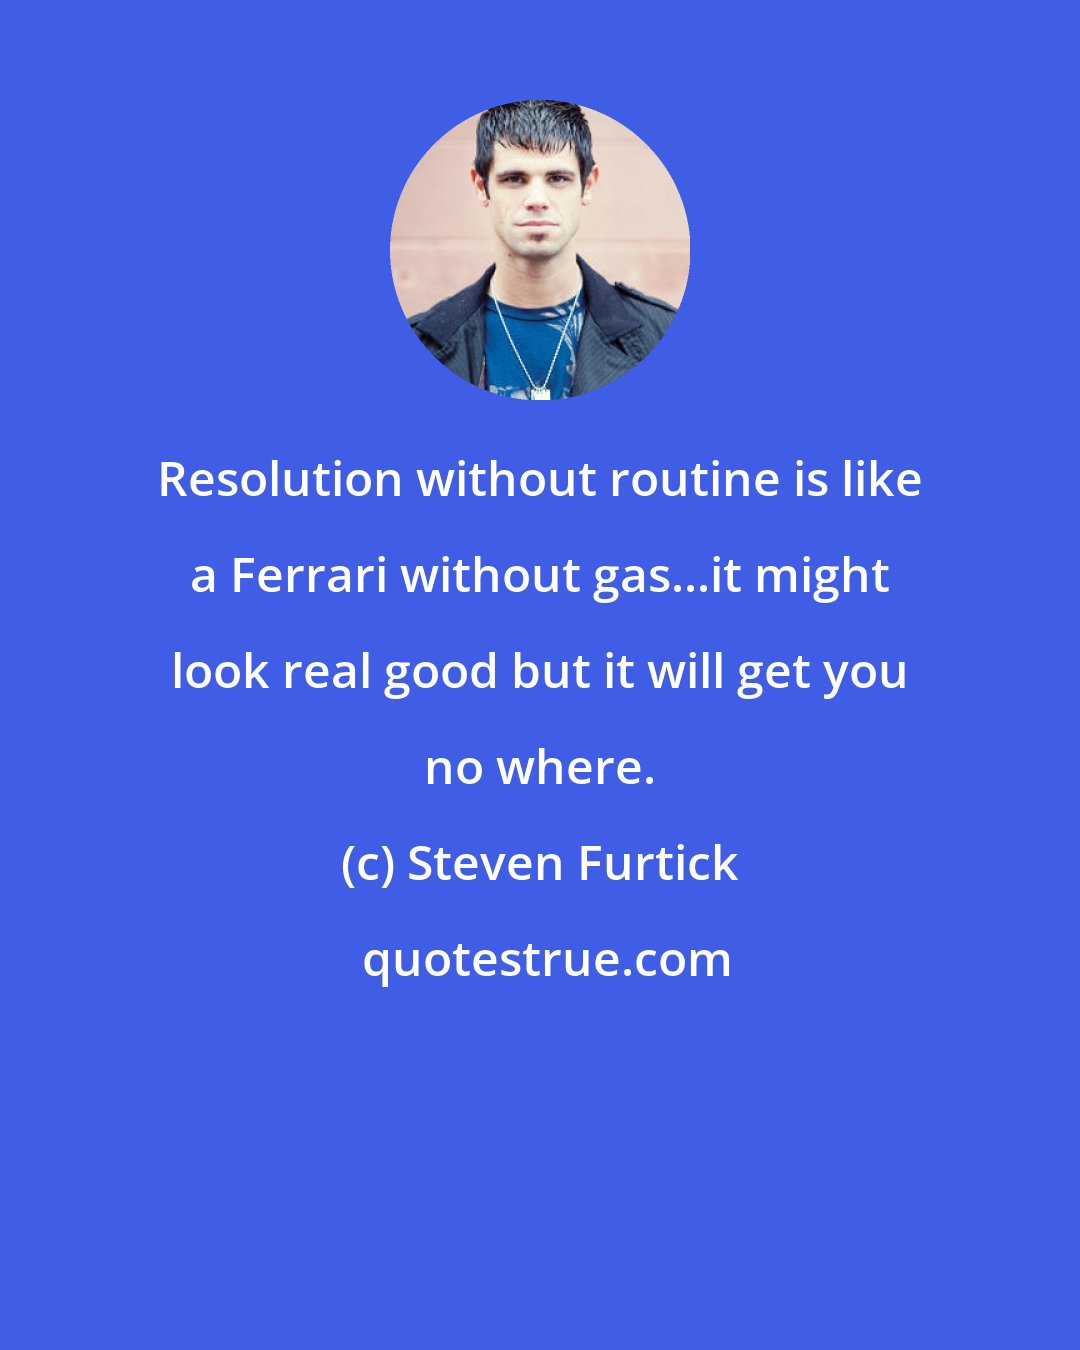 Steven Furtick: Resolution without routine is like a Ferrari without gas...it might look real good but it will get you no where.